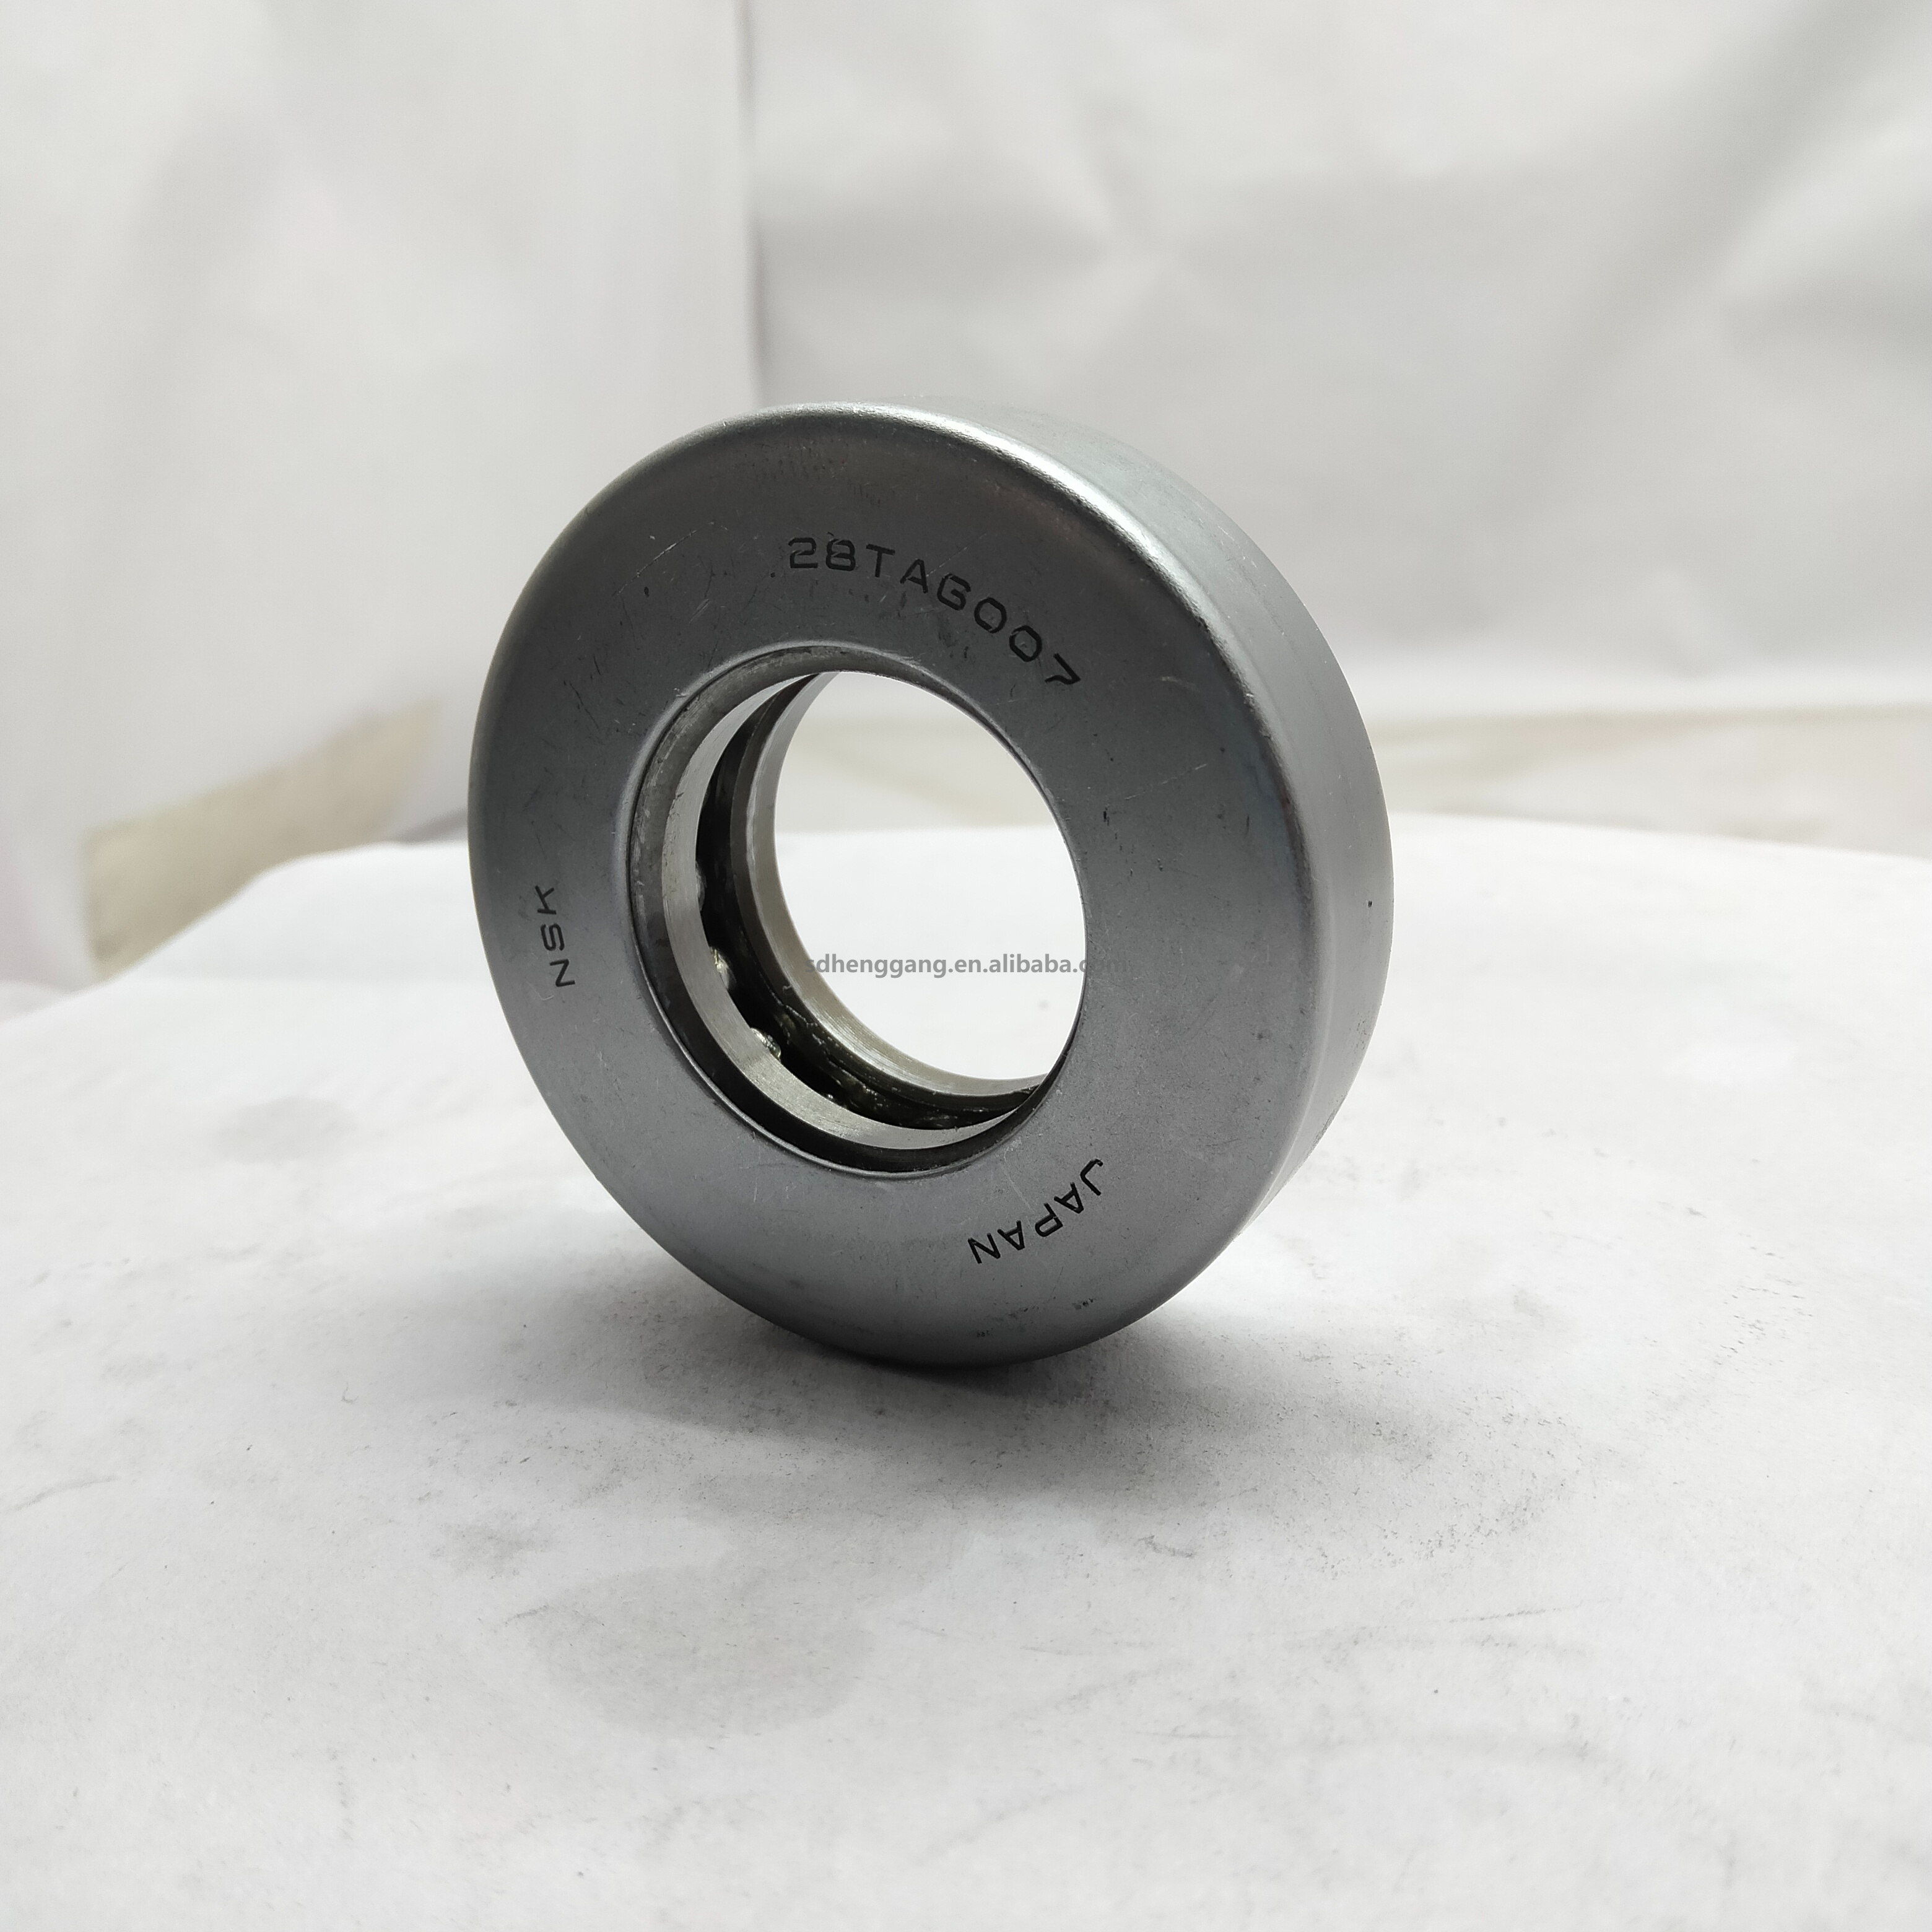 NSK Clutch Release Bearing 28TAG007 28x56x16mm Thrust Ball Bearing 28TAG007 Non-standard Ball Bearing